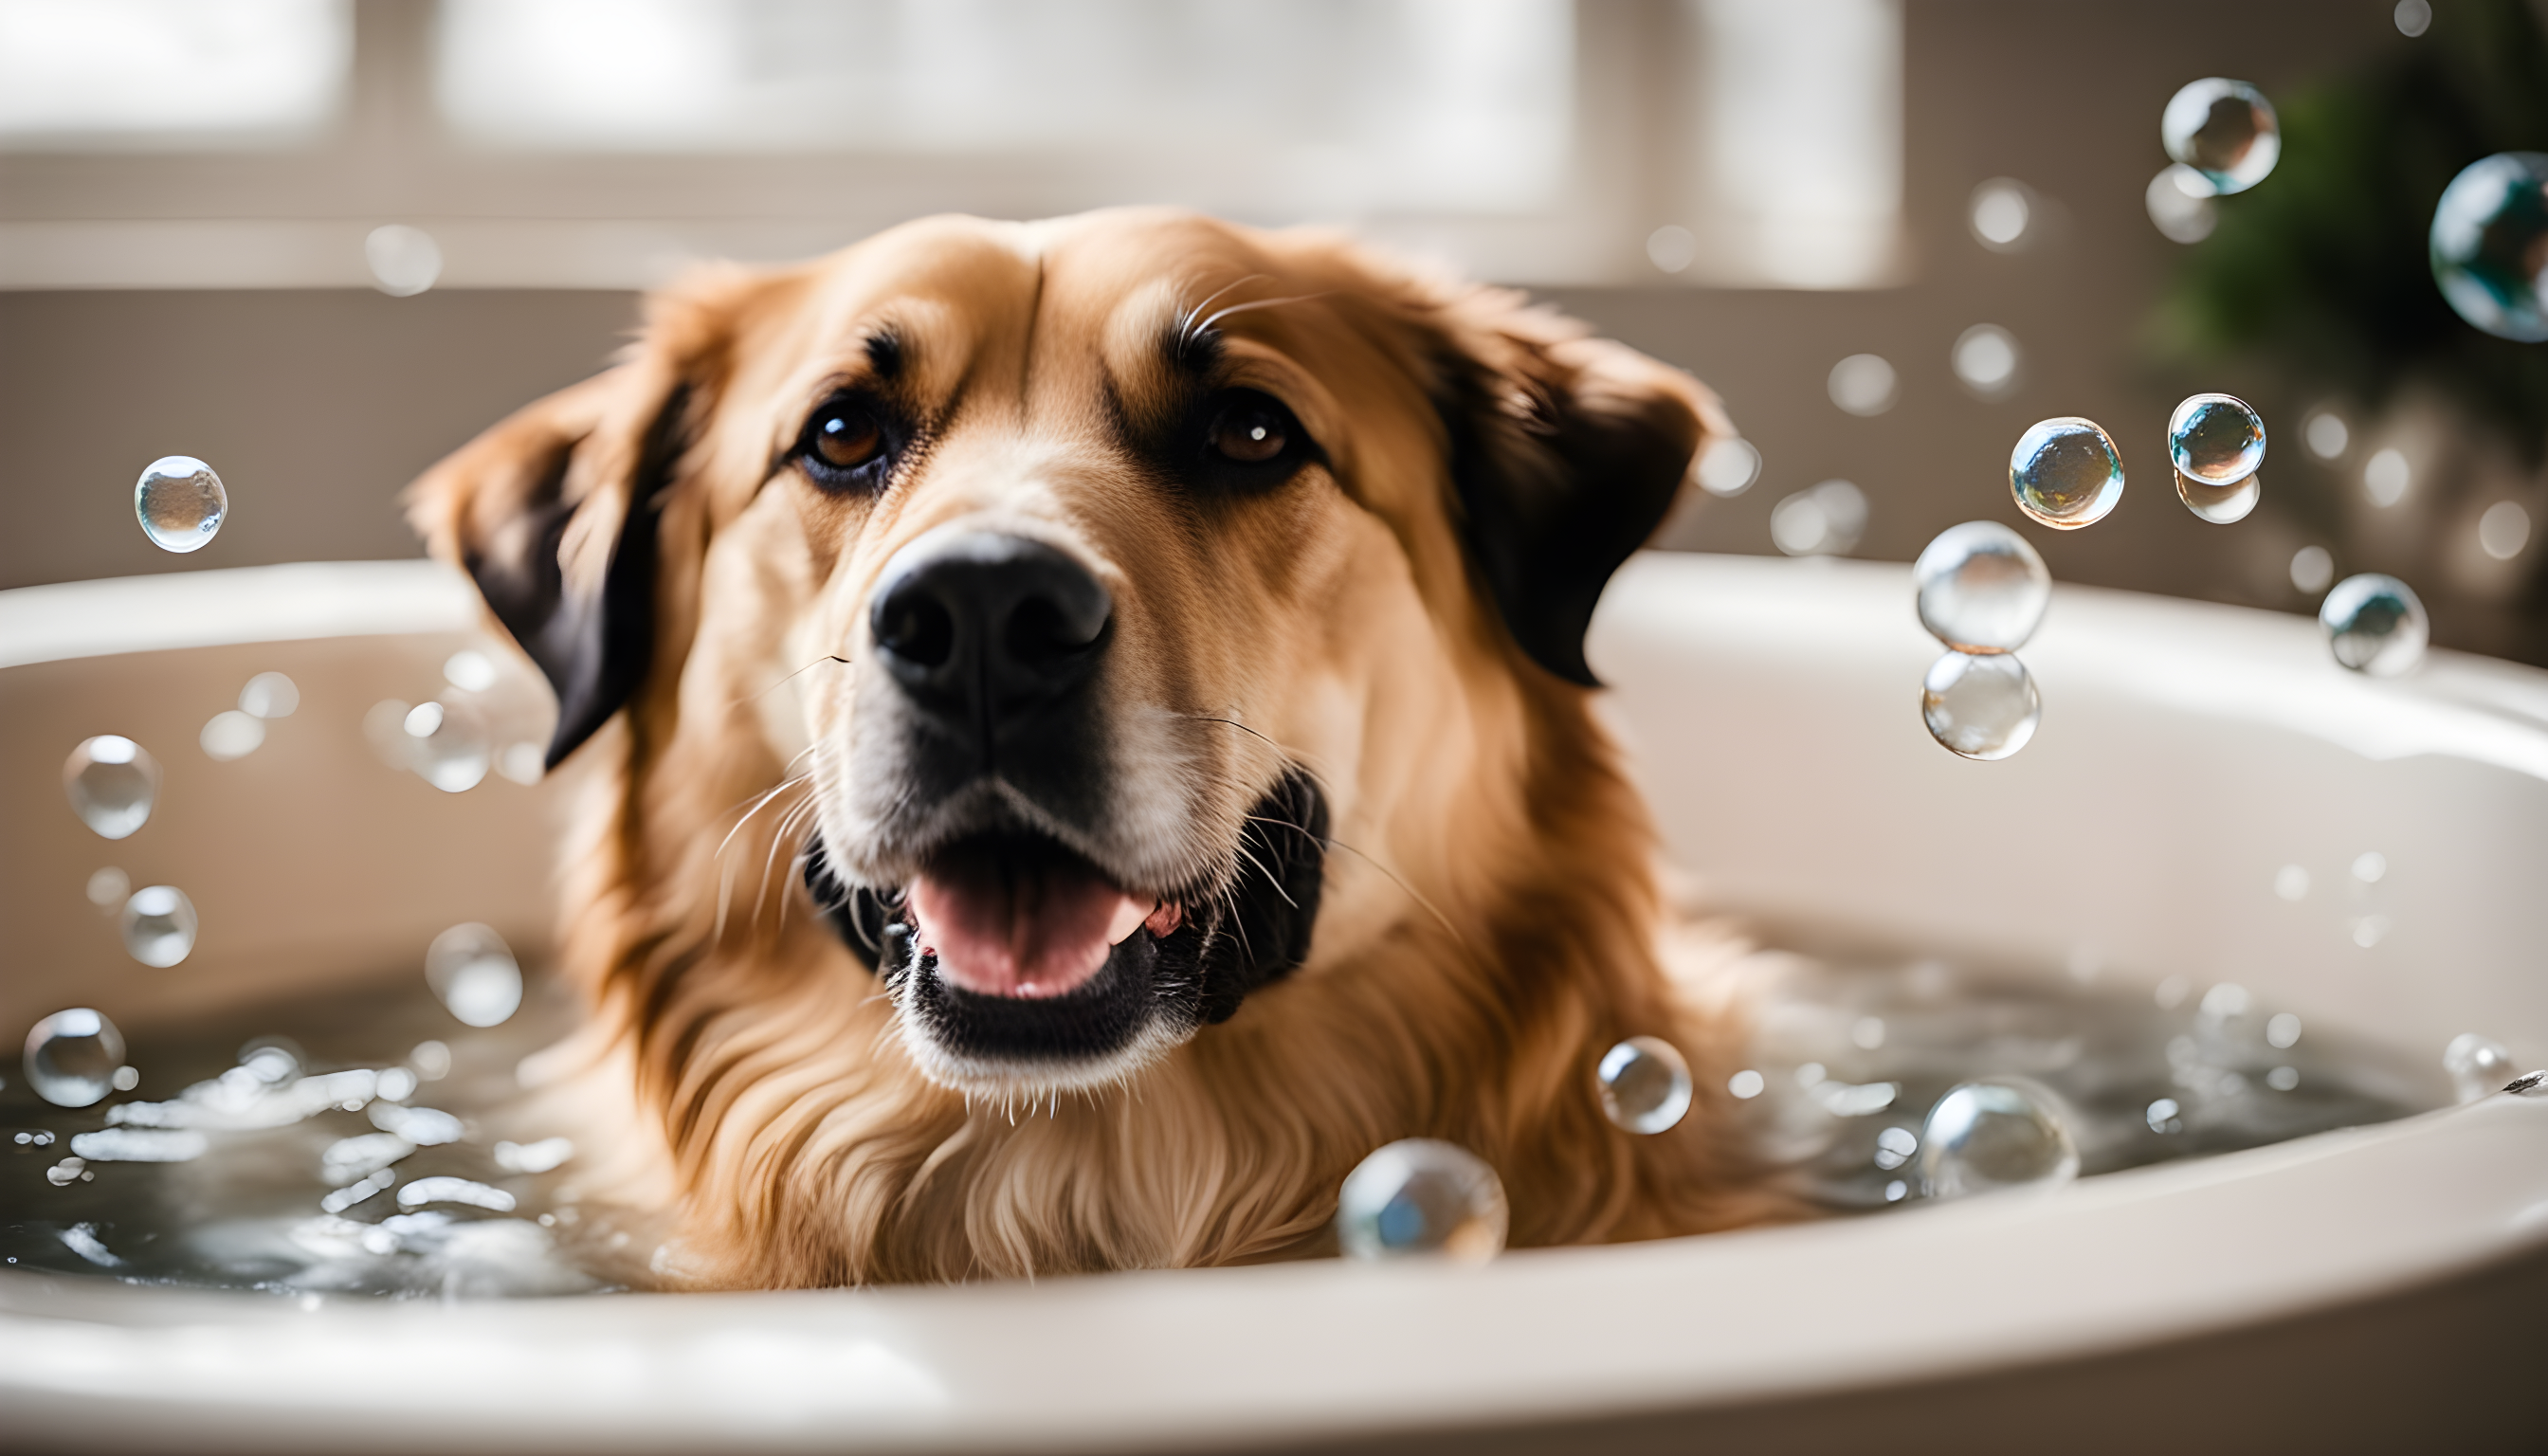 A Sheprador soaking in a tub, surrounded by bubbles, living its best life.